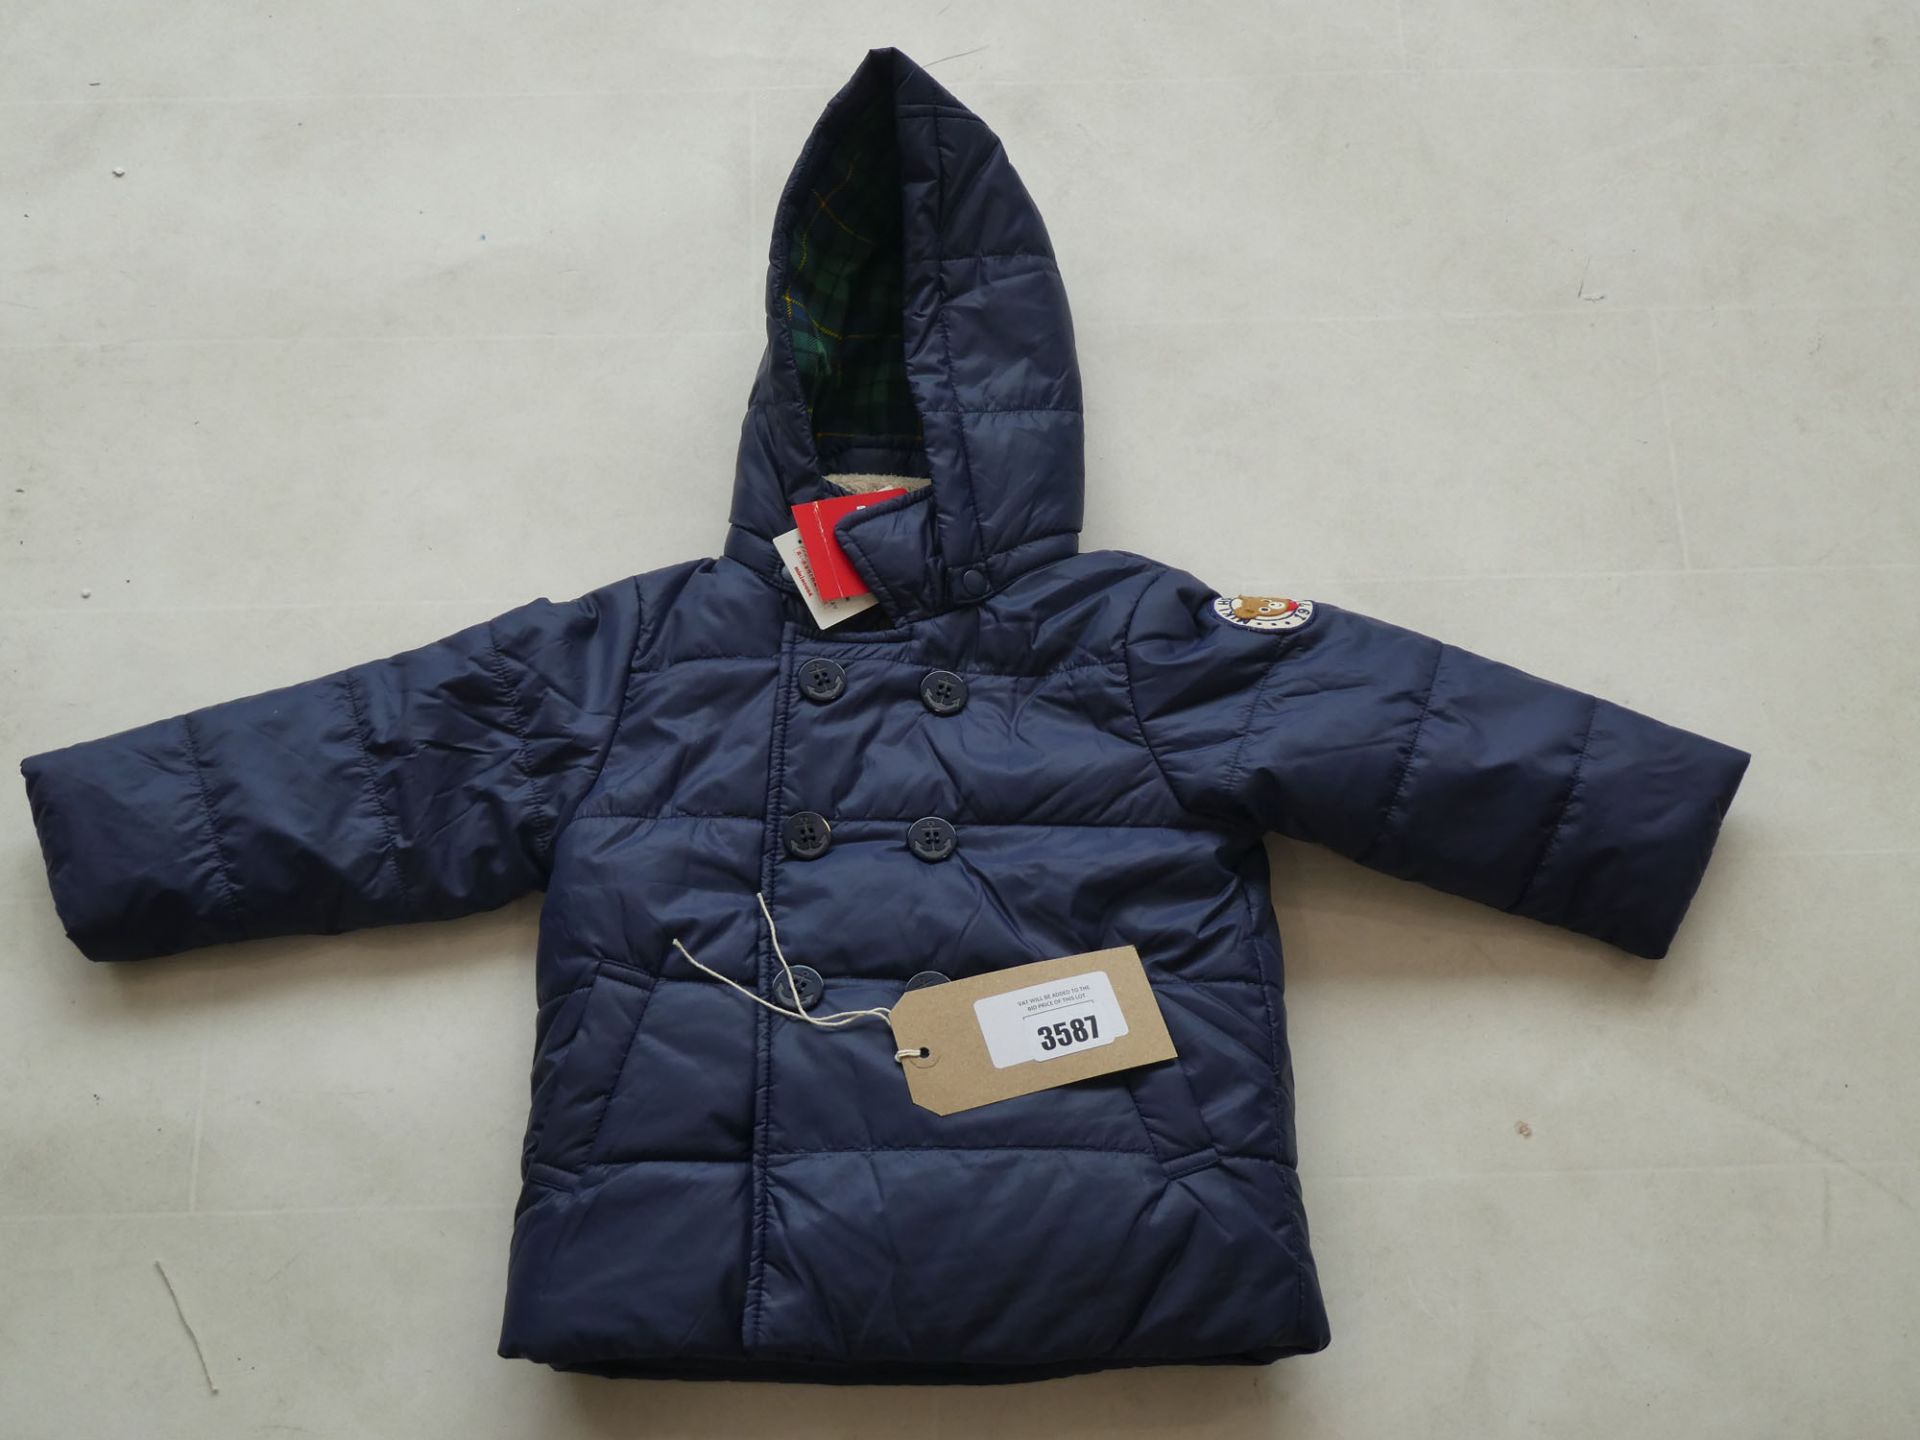 Miki House original 2 in 1 navy puffer jacket and fleece bodywarmer child's size 90 (2 years old)